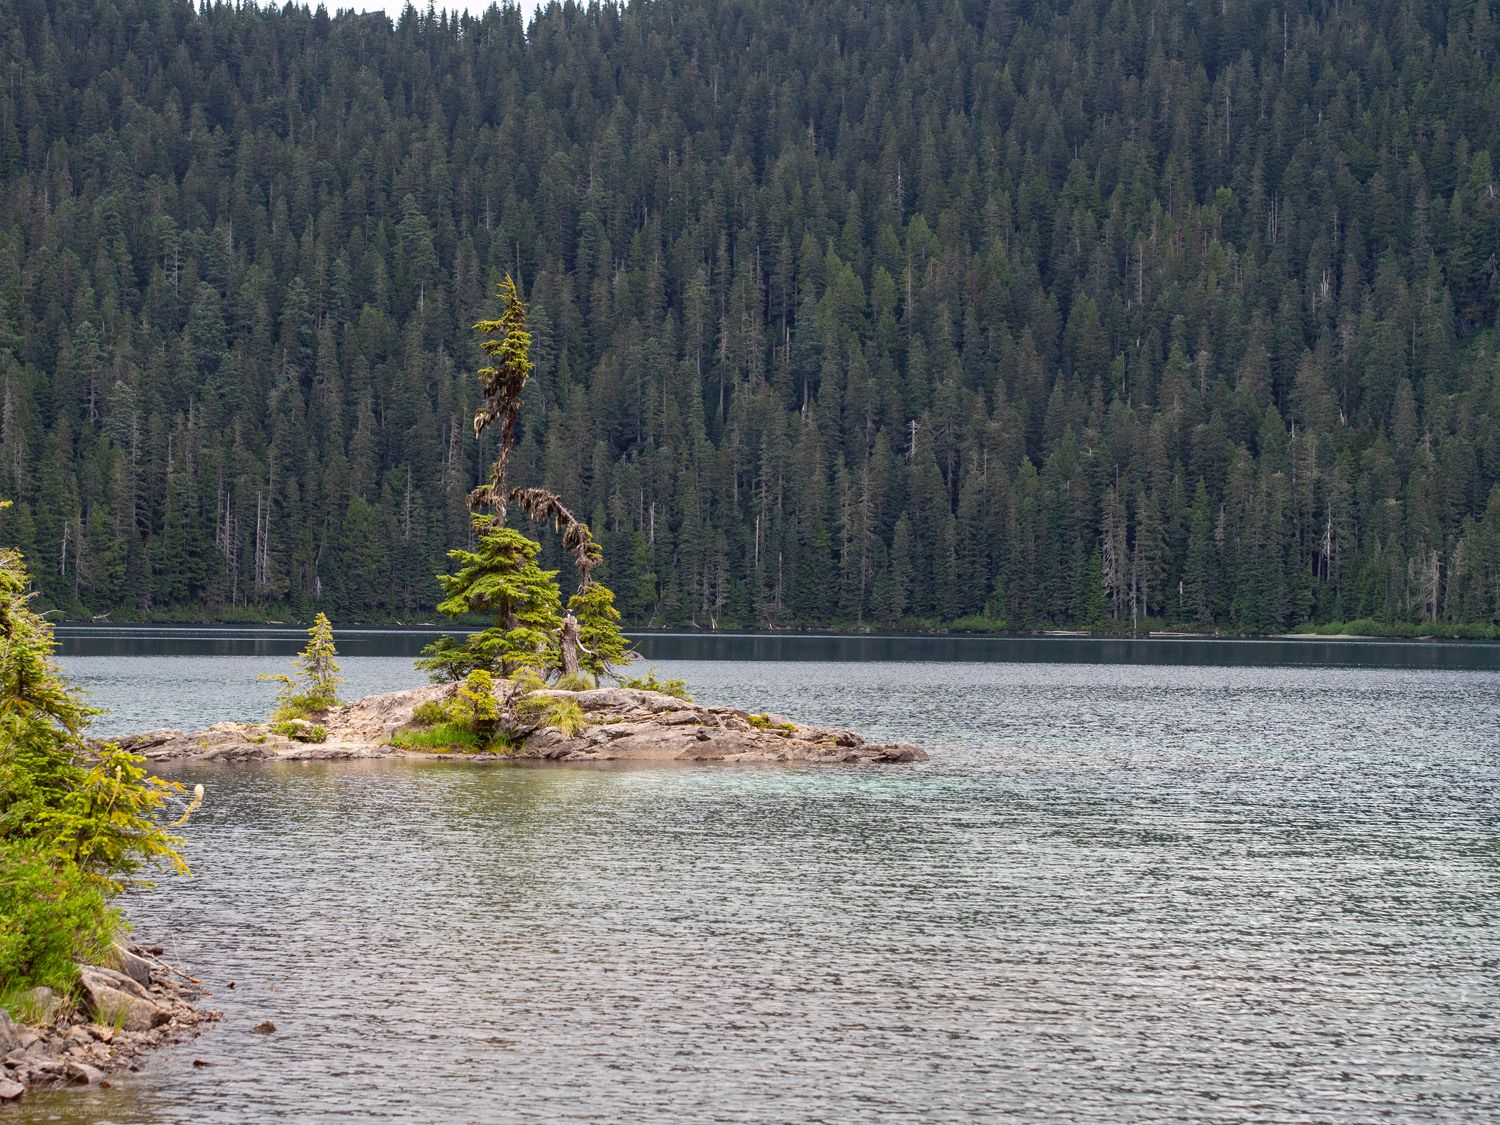 A small island near the shore of a lake. There is one large, very worn pine tree and a smaller younger tree next to it.